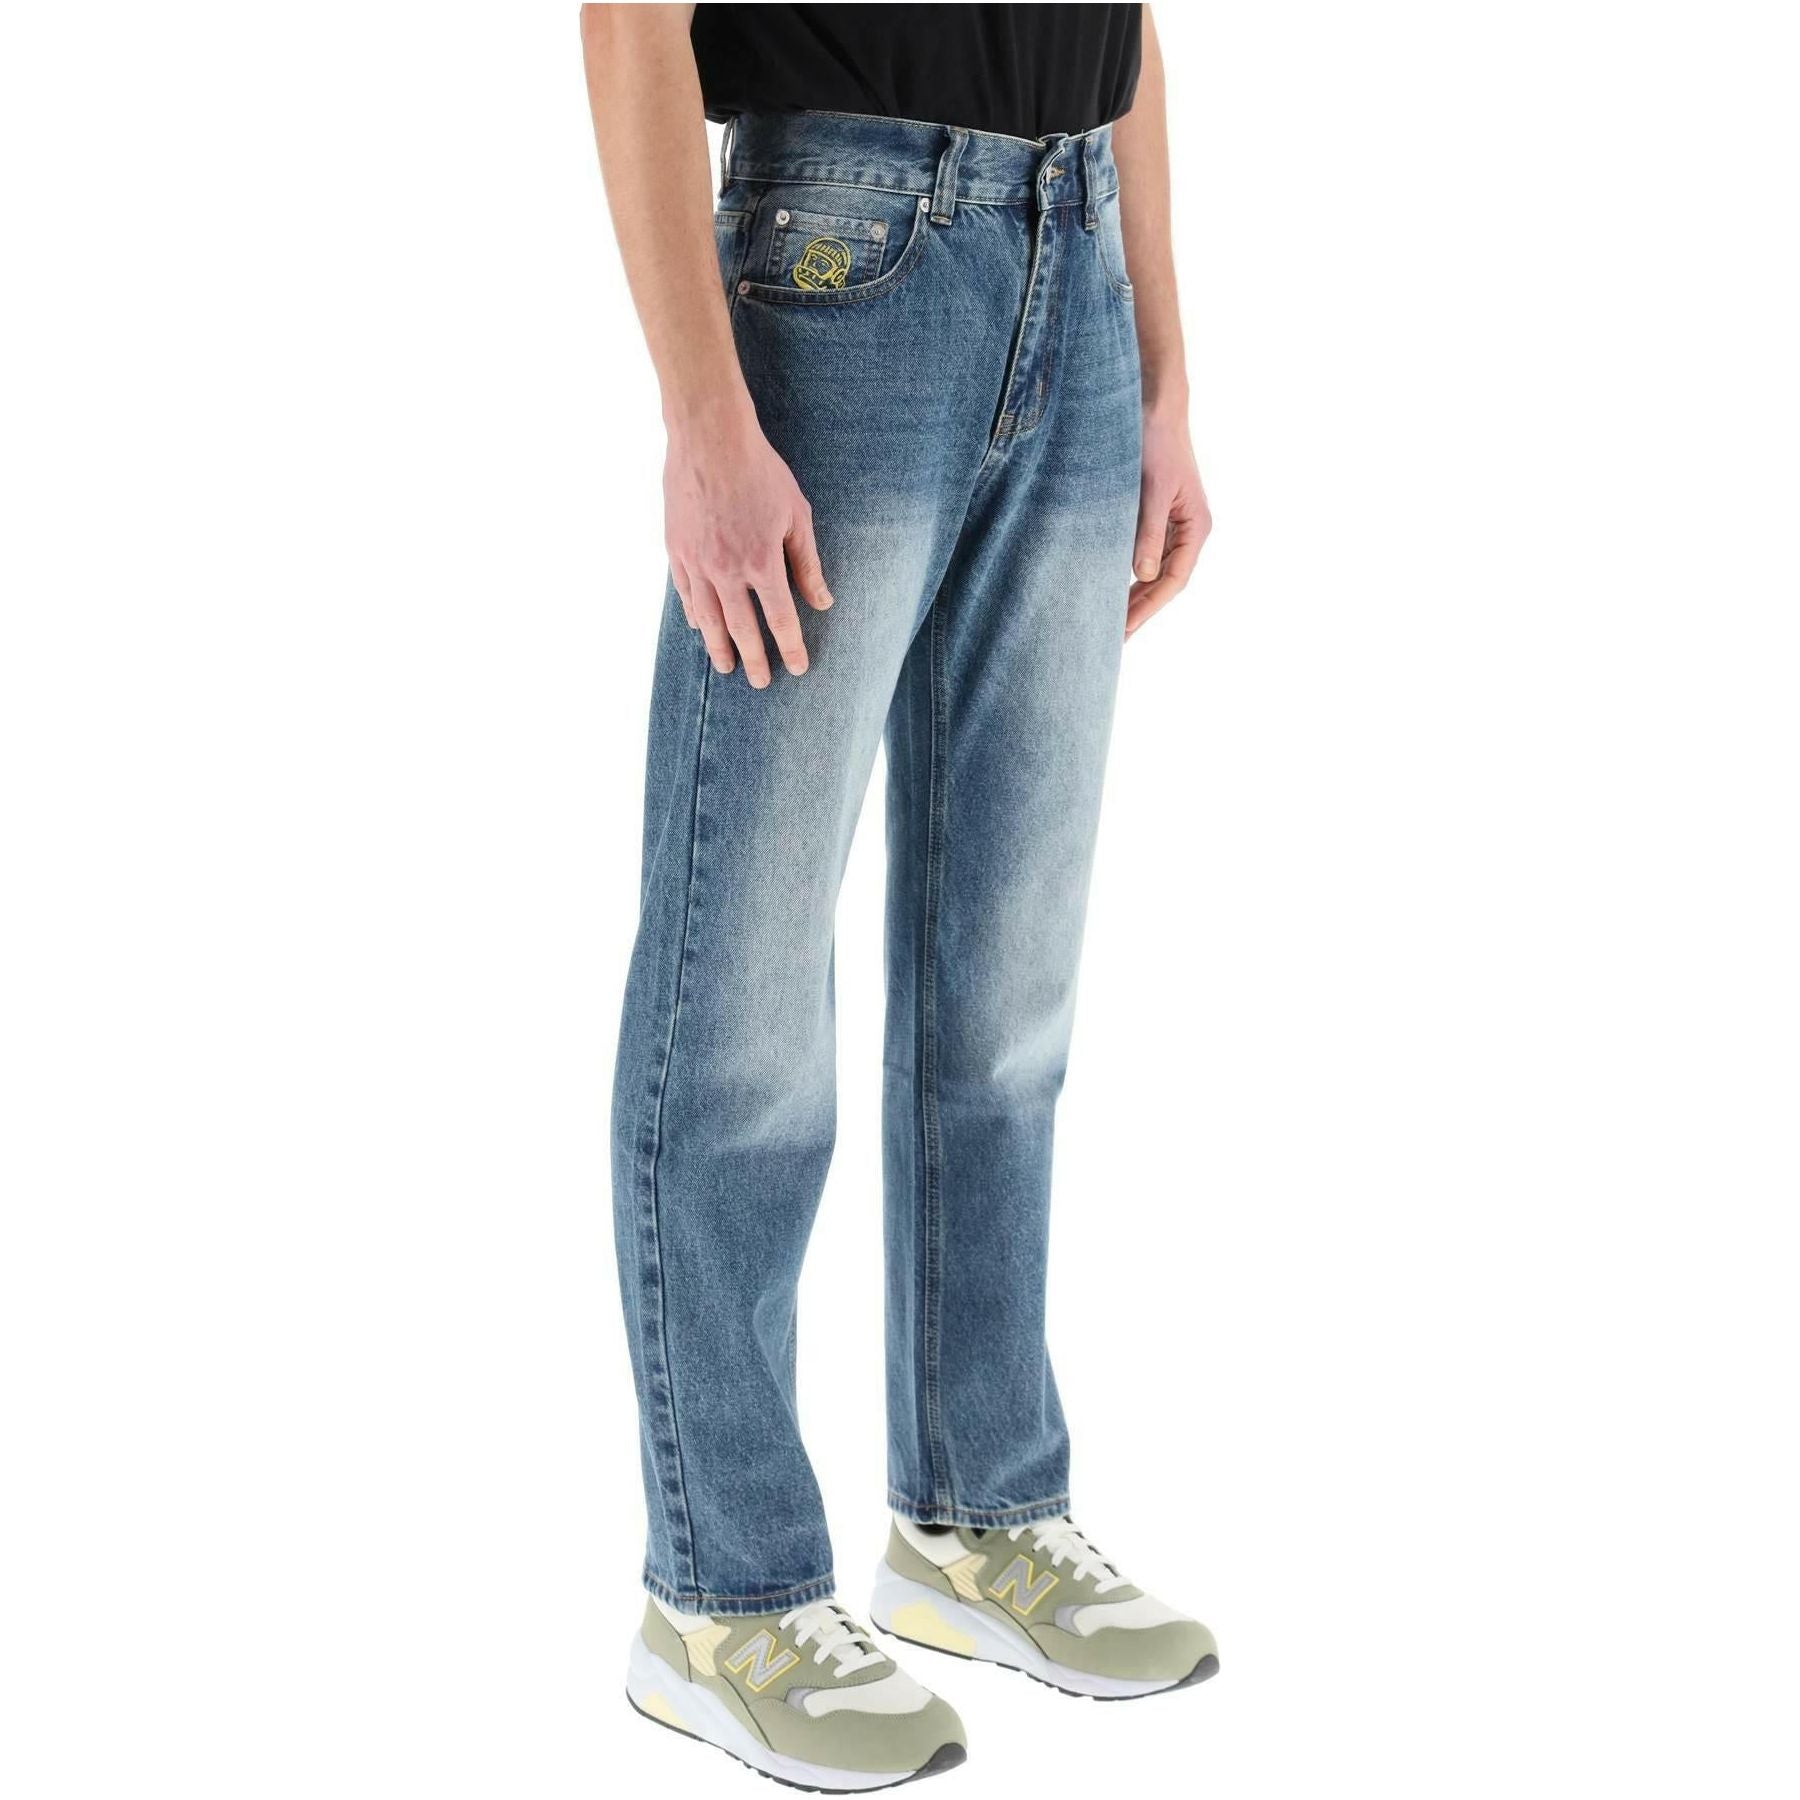 Billionaire Boys Club Jeans With Embroidery Decorations BILLIONAIRE BOYS CLUB JOHN JULIA.